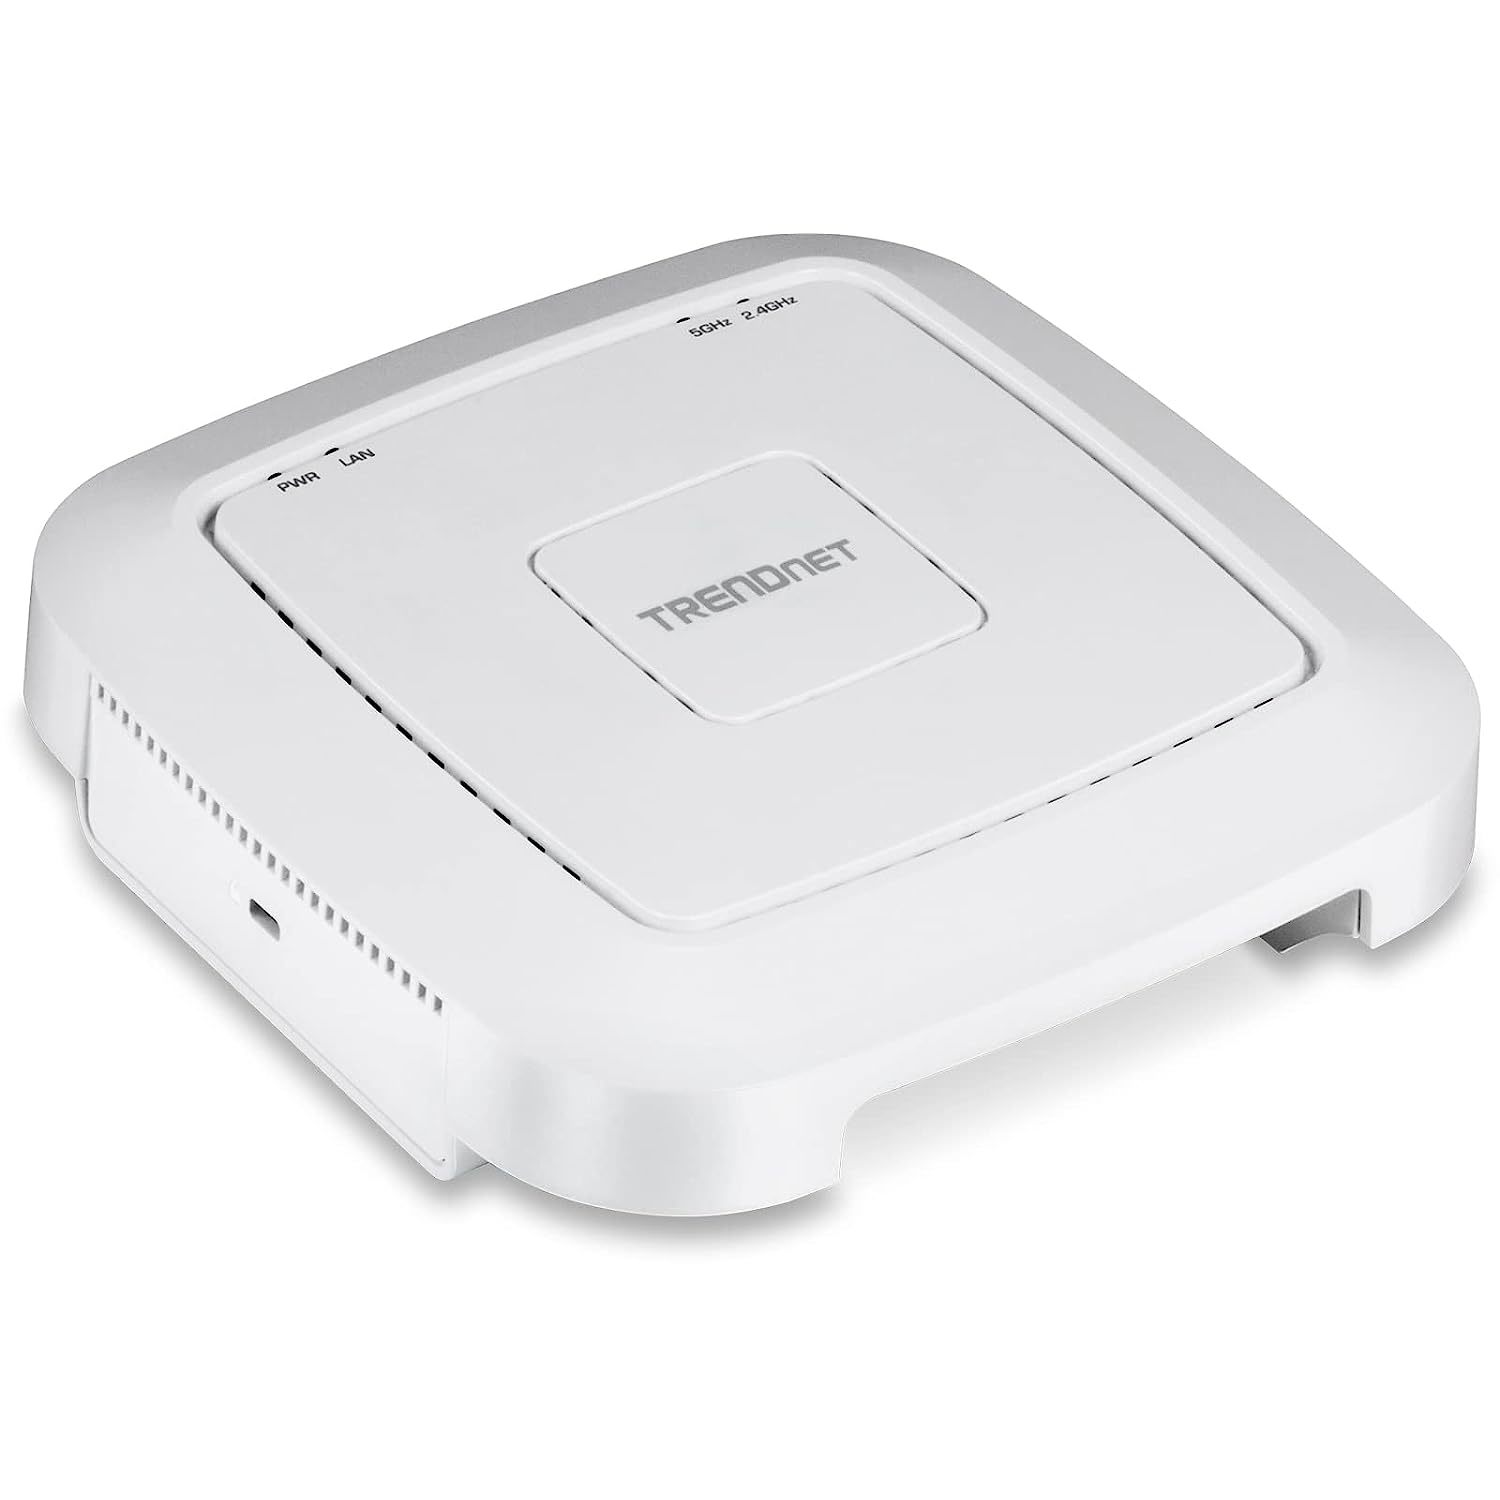 TRENDnet AC1200 Dual Band PoE Access Point, TEW-821DAP, MU-MIMO, 867 Mbps WiFi A - $152.99